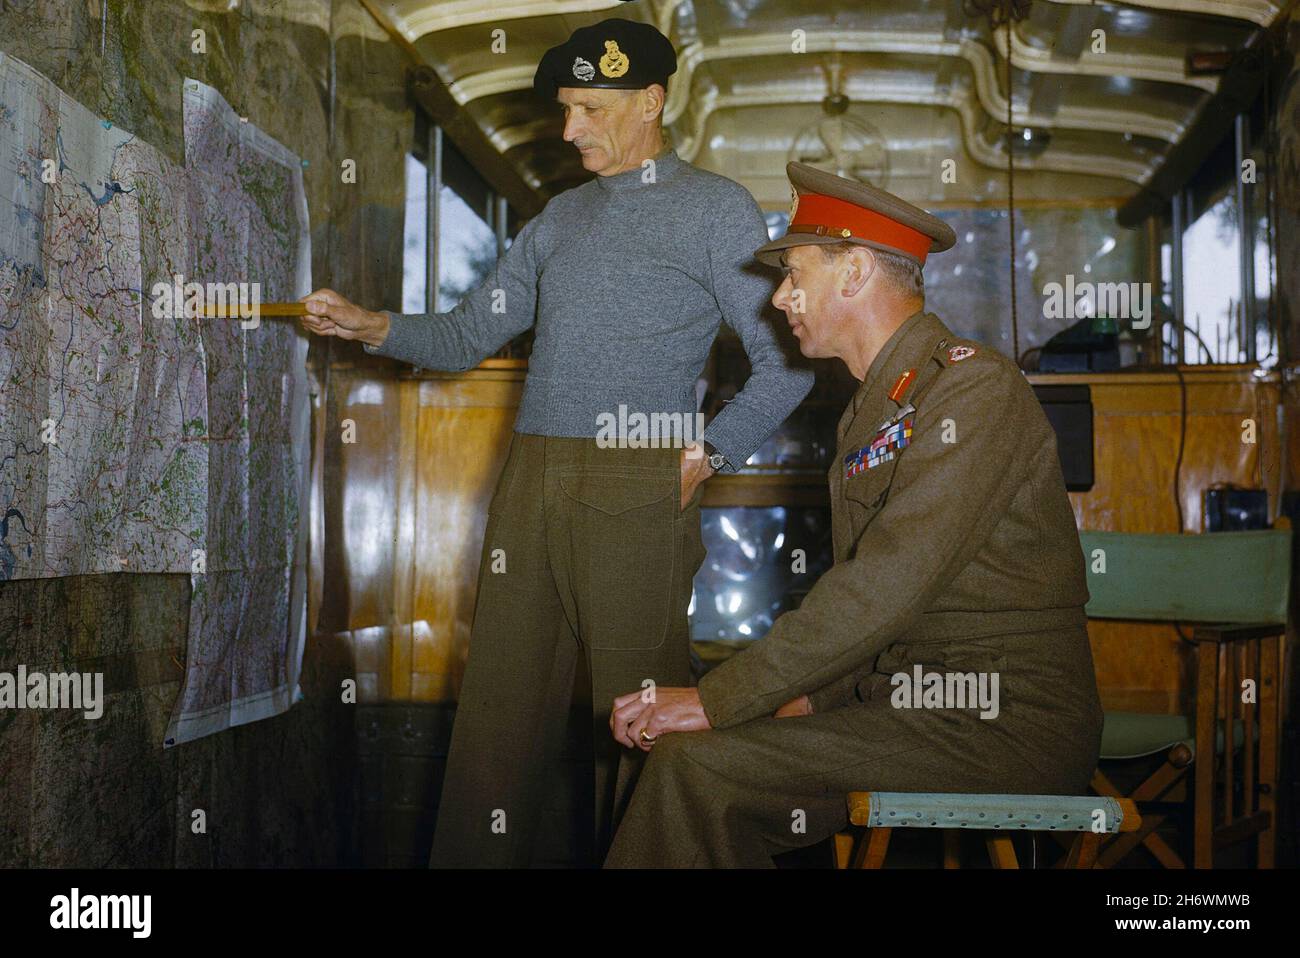 THE NETHERLANDS - 13 October 1944. - During a tour of the 2nd Army area, HM King George VI visited the headquarters of the Commander of the 21st Army Stock Photo